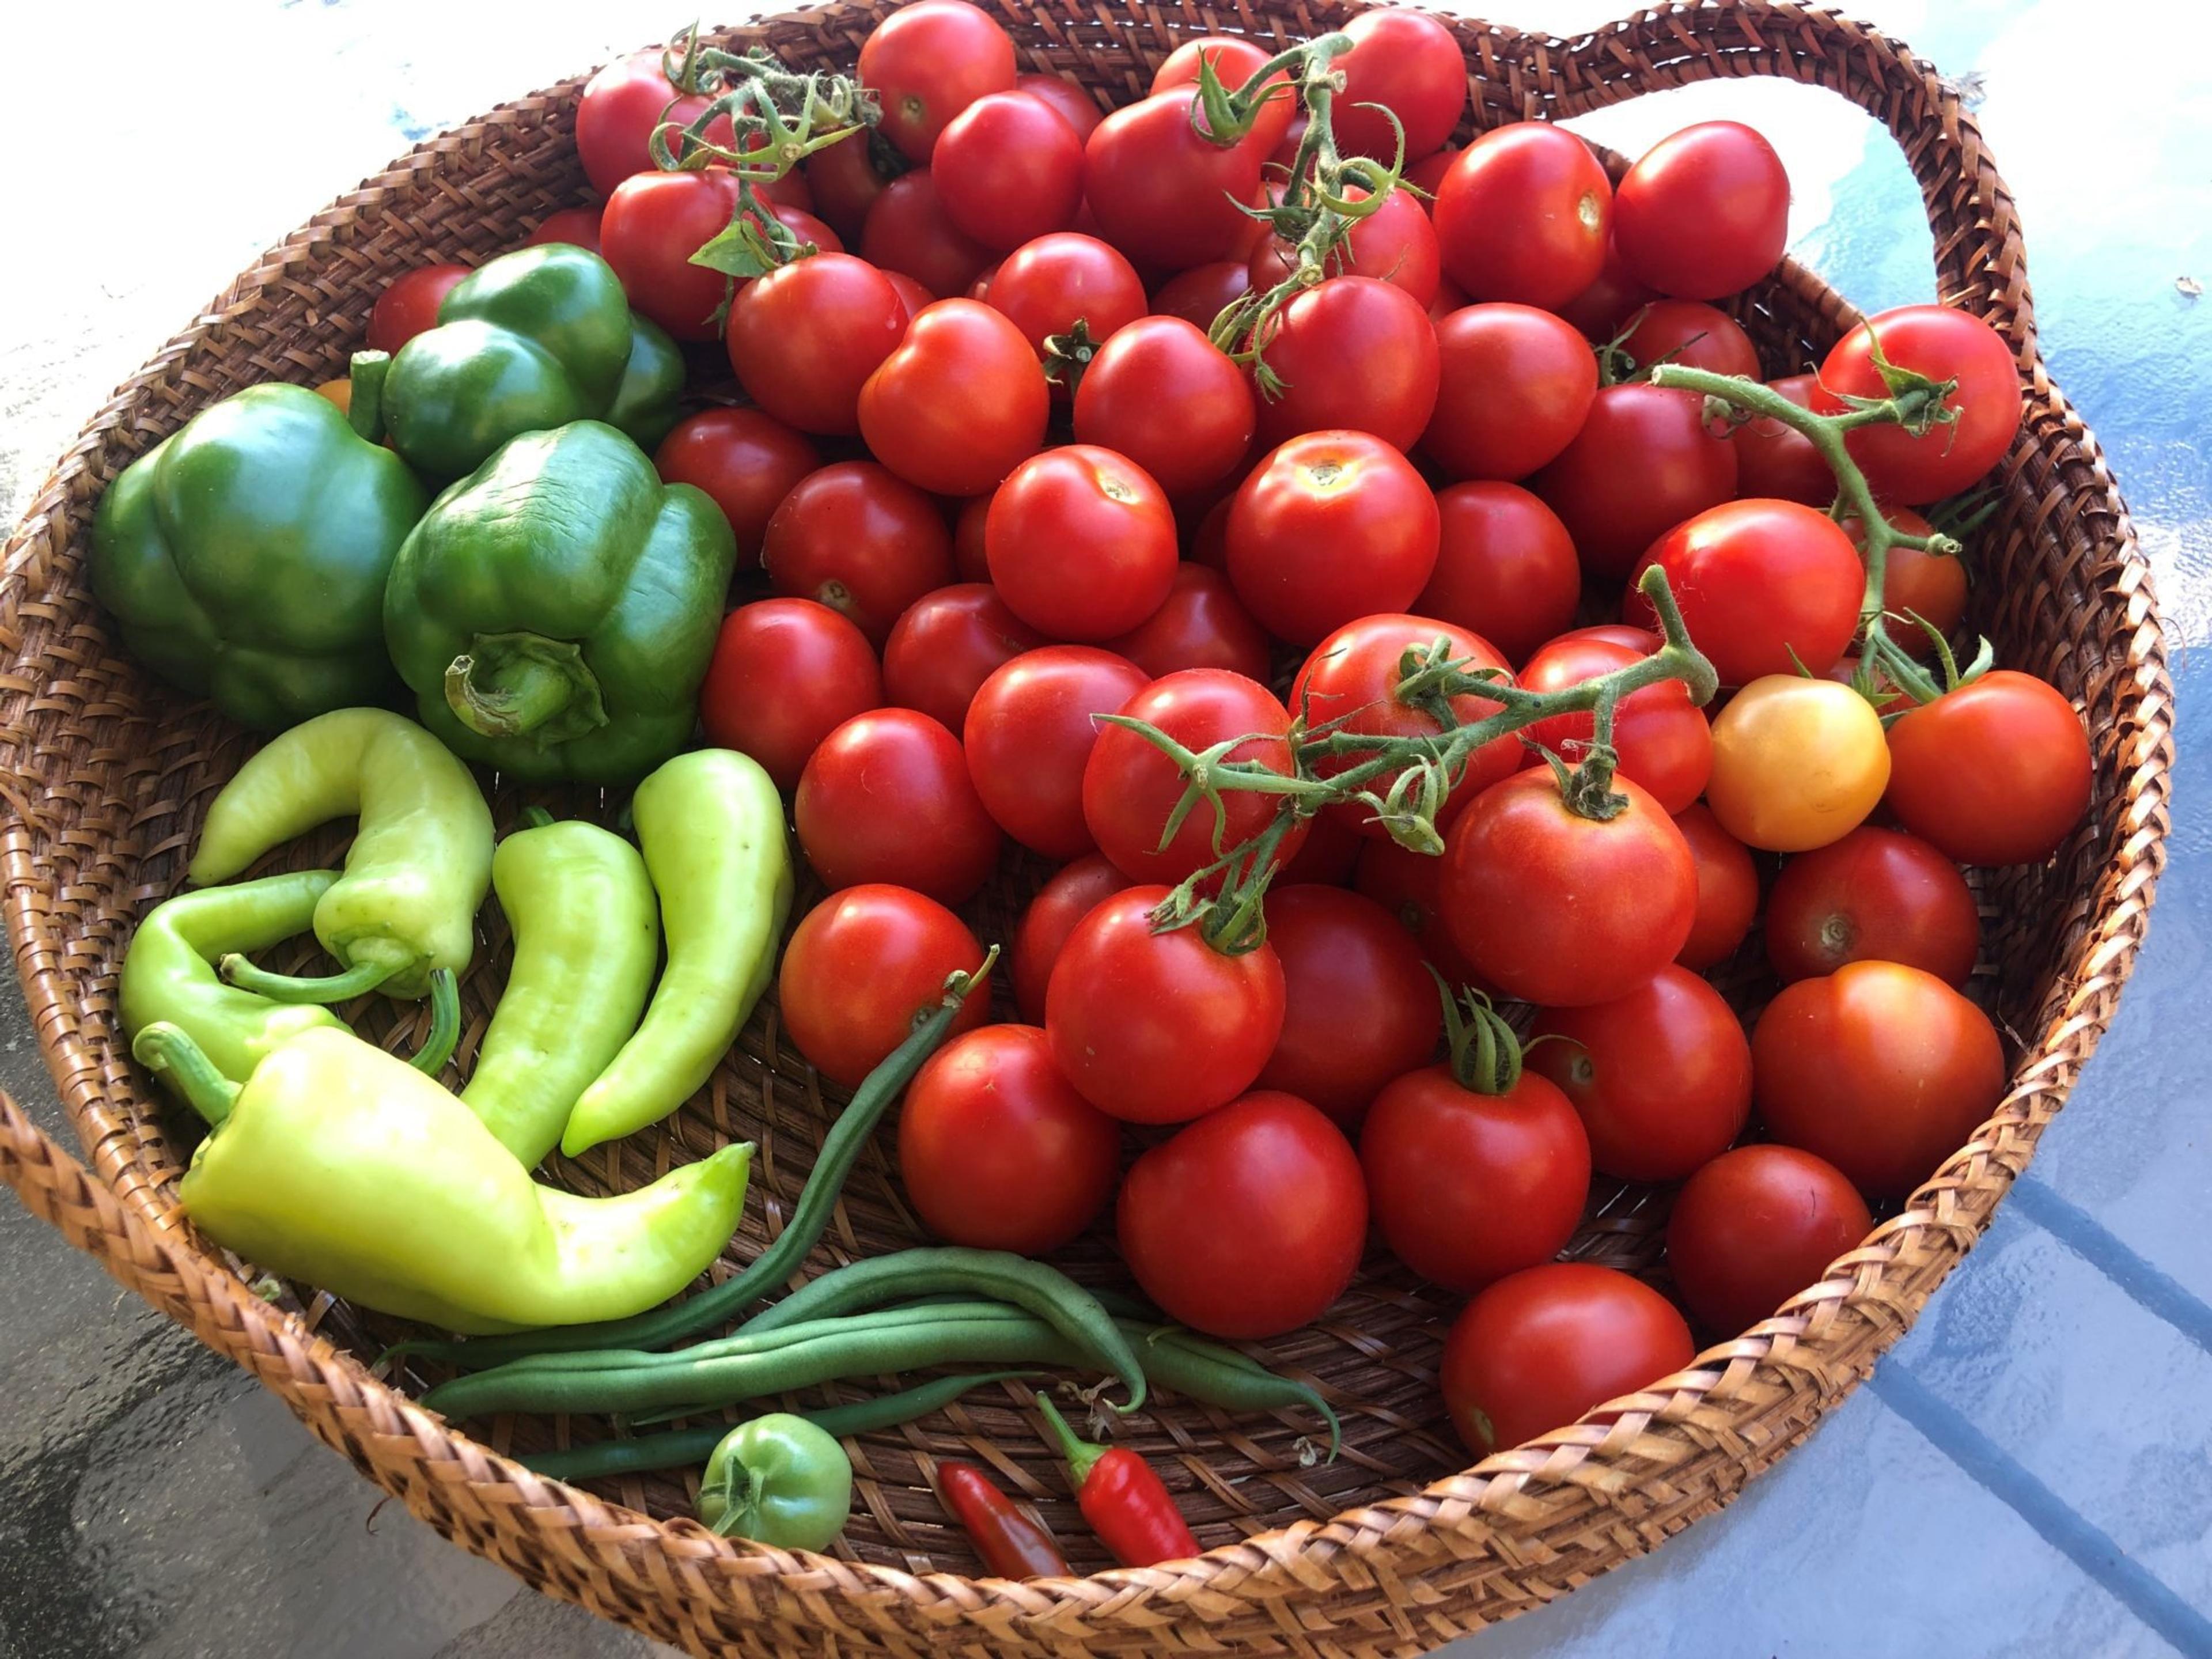 Basket of tomatoes